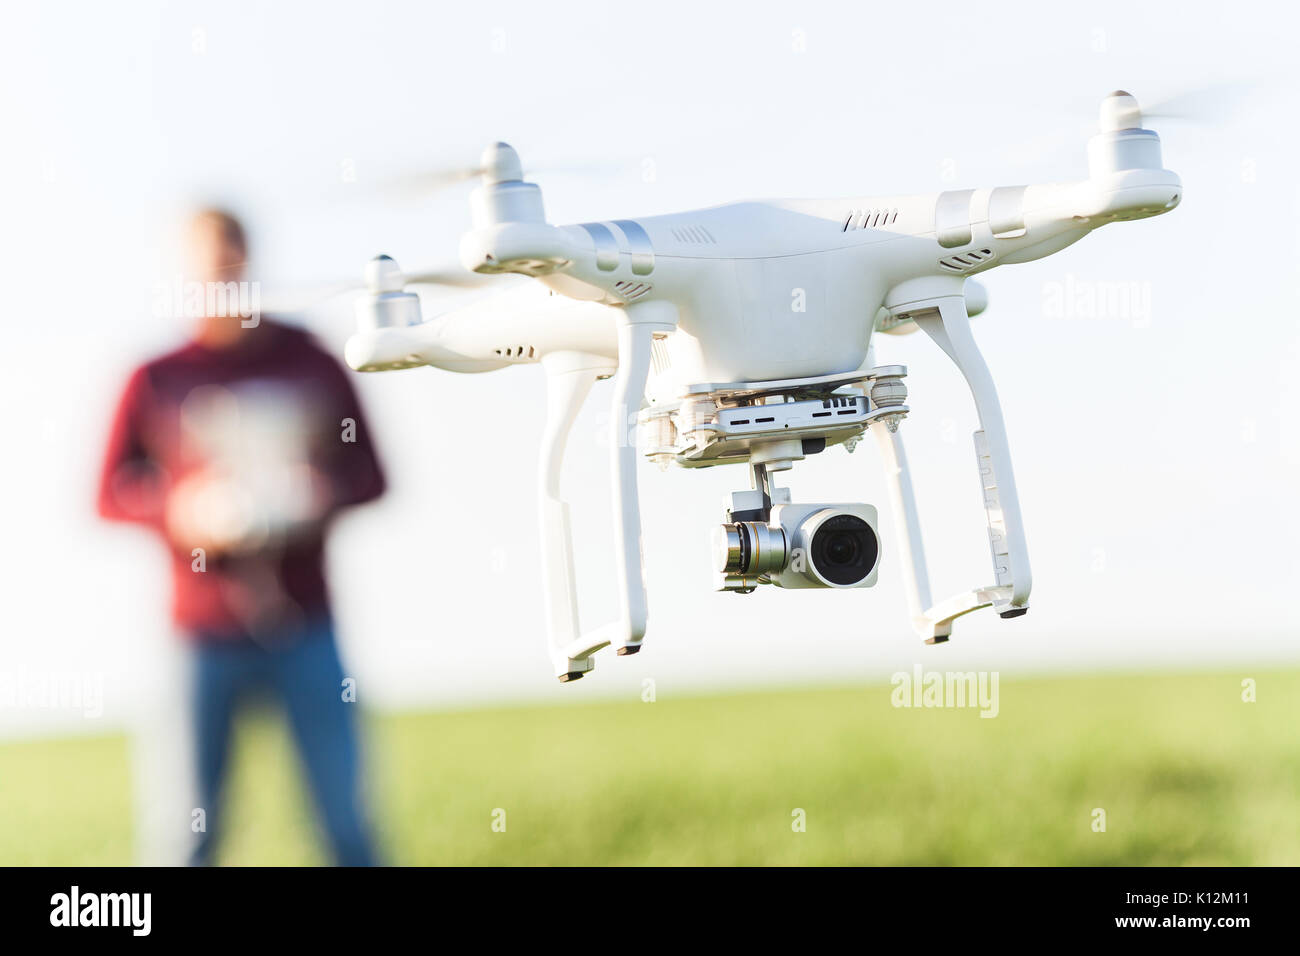 RUSSIA, ROSTOV-ON-DON - APRIL 20, 2017: closeup on superb white high-tech drone at low altitude, at background is a male pilot in jeans and fleece hoo Stock Photo